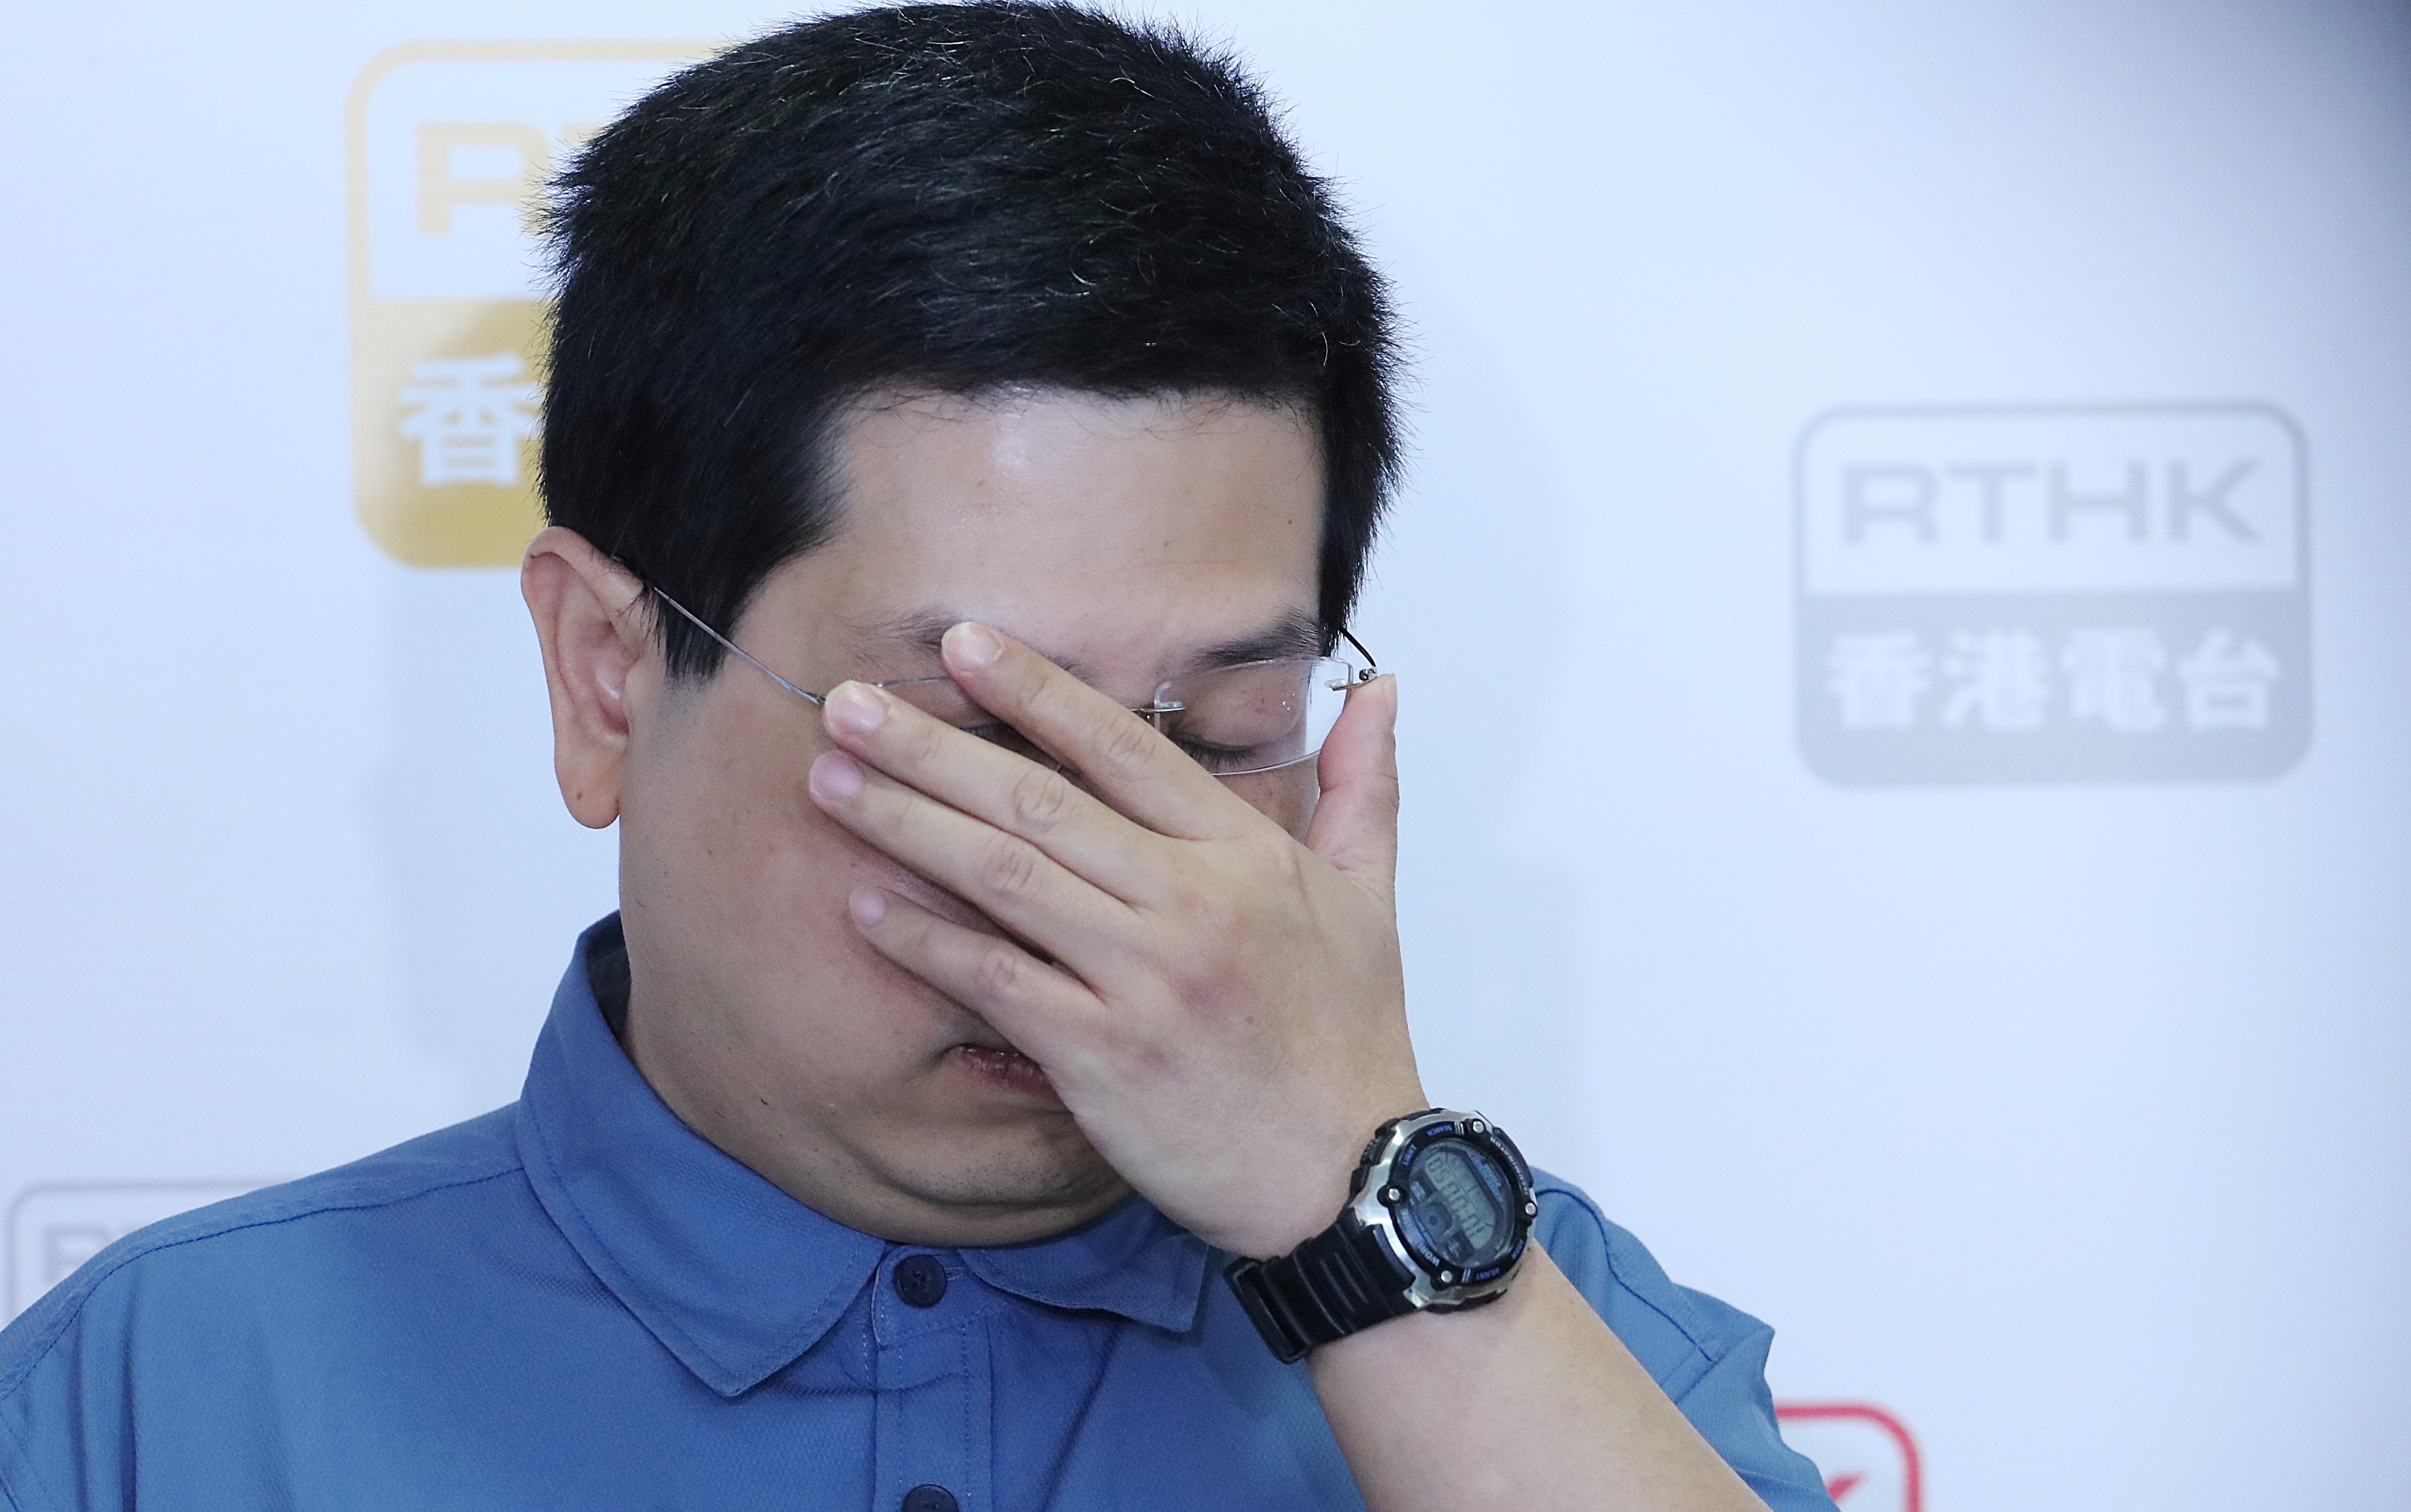 Democratic Party member Howard Lam Tsz-kin attends a radio programme at RTHK in Kowloon Tong after making public his claims for abduction and torture by mainland agents. Photo: Felix Wong